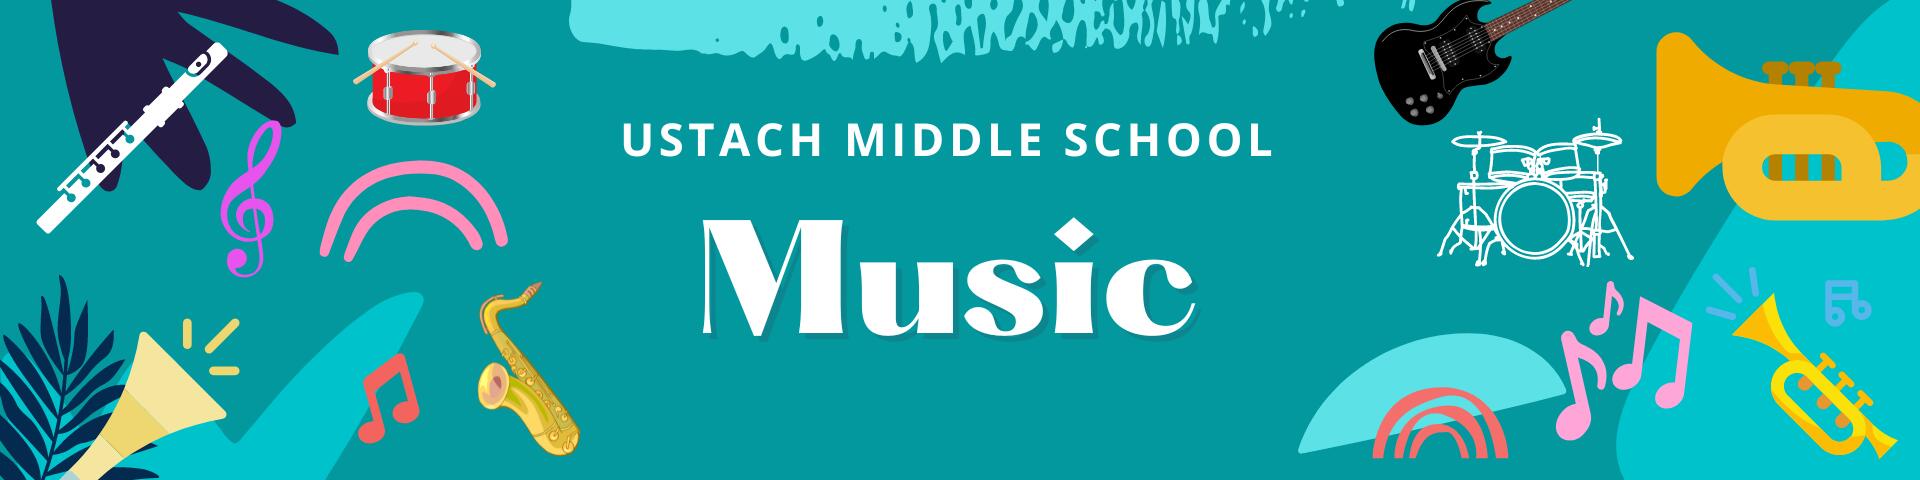 Music at Ustach Middle School, Band, Orchestra